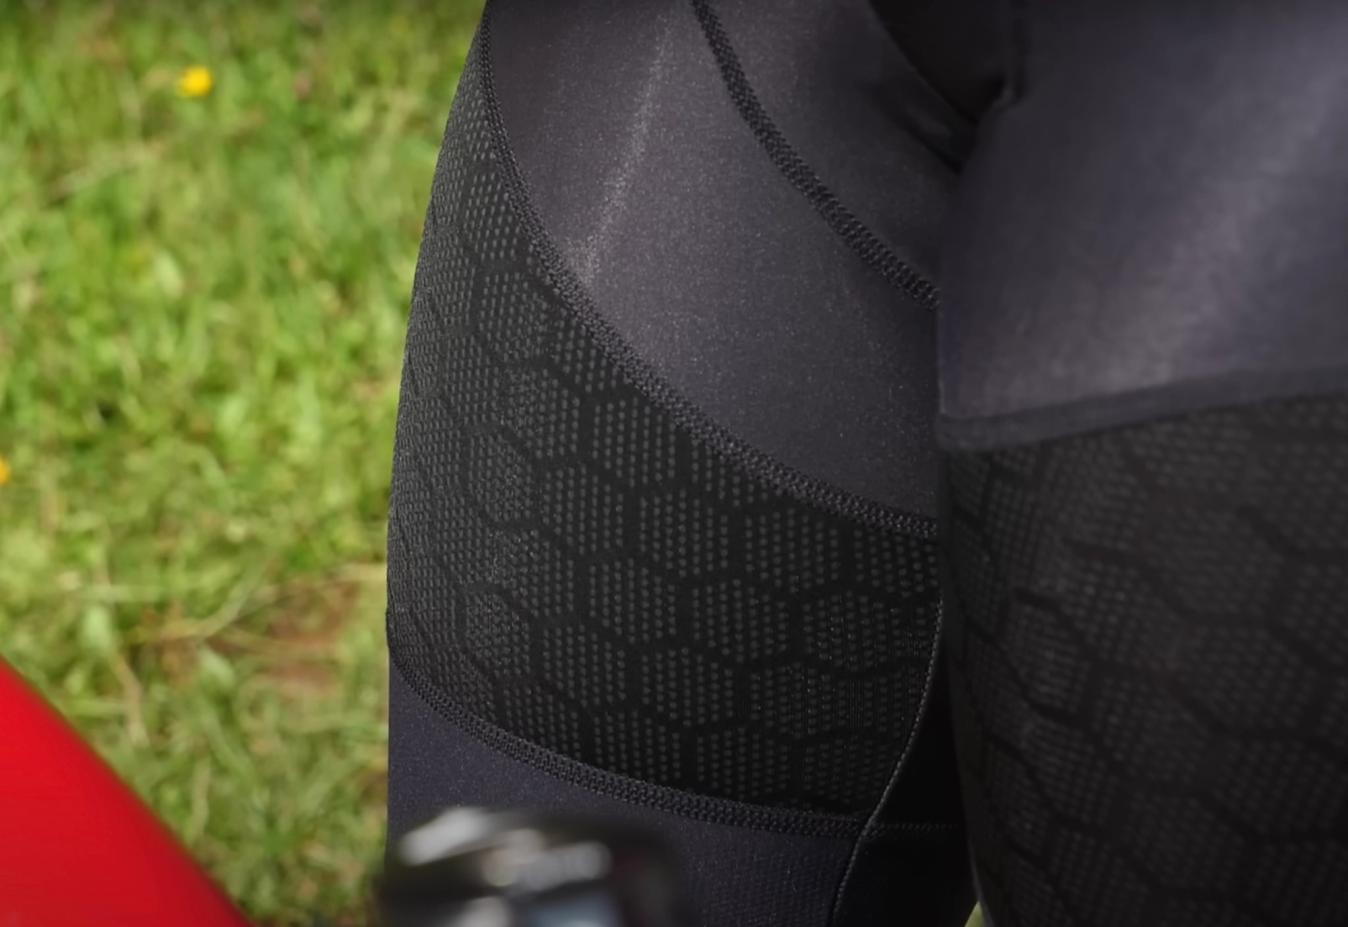 Gravel shorts have a greater resistance to abrasions than typical road shorts 